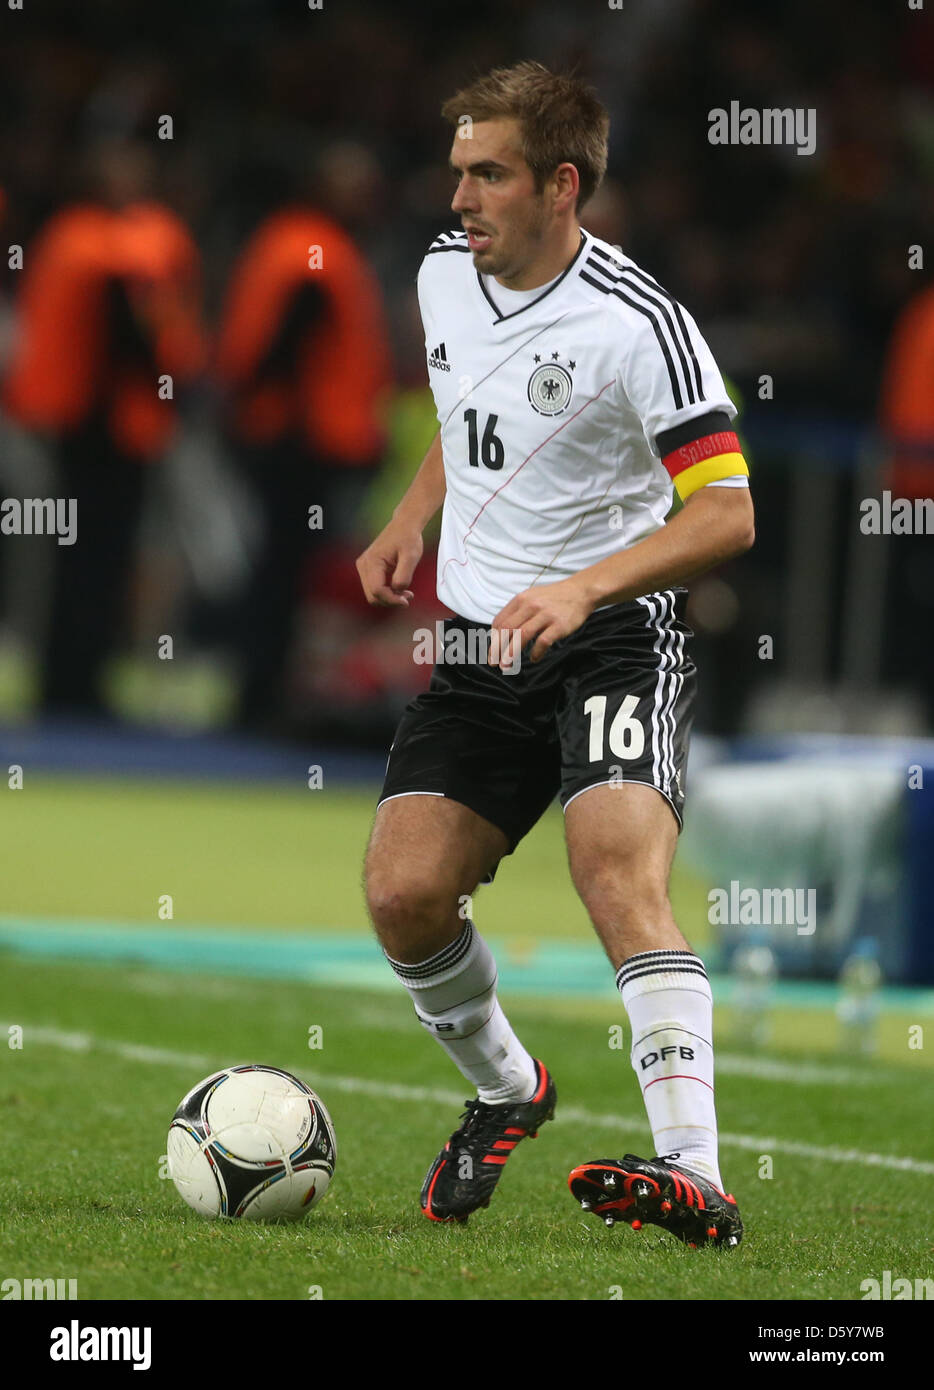 Germany's Philipp Lahm in action during the FIFA World Cup 2014 qualifying soccer match between Germany and Sweden at Olympic stadium in Berlin, Germany, 16 October 2012. Photo: Kay Nietfeld/dpa Stock Photo